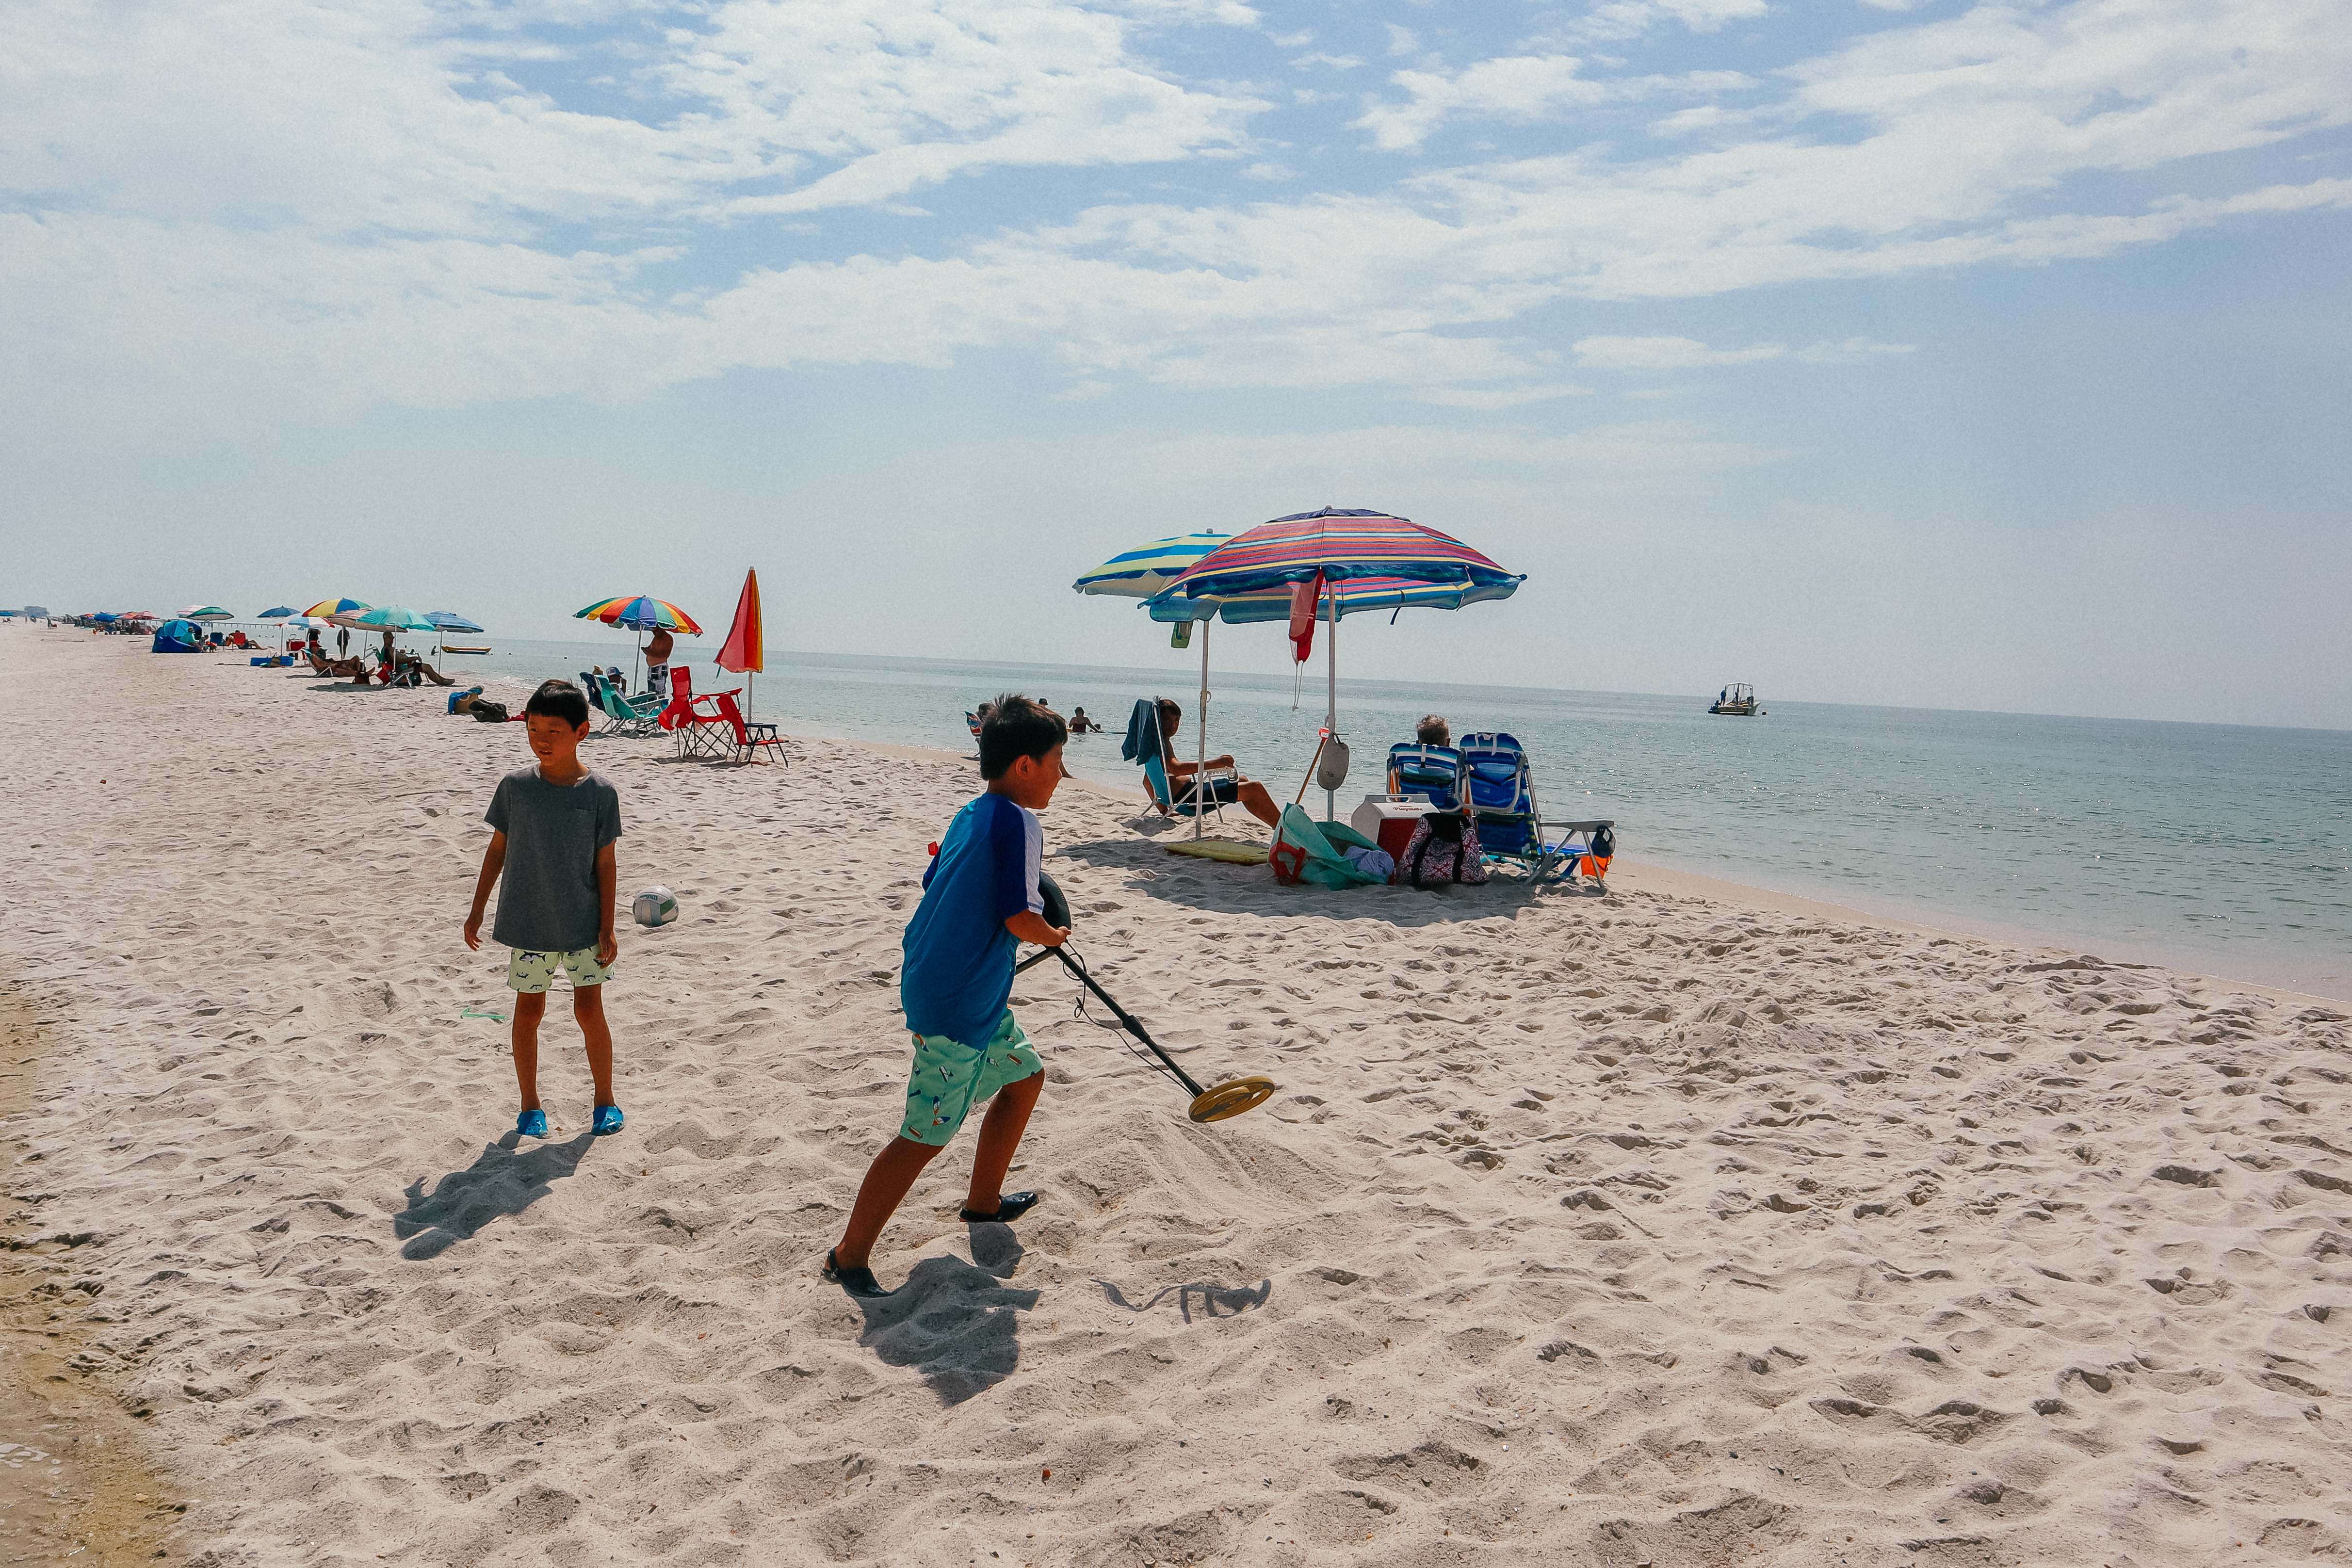 Children playing on the beach in Gulf Shores, AL